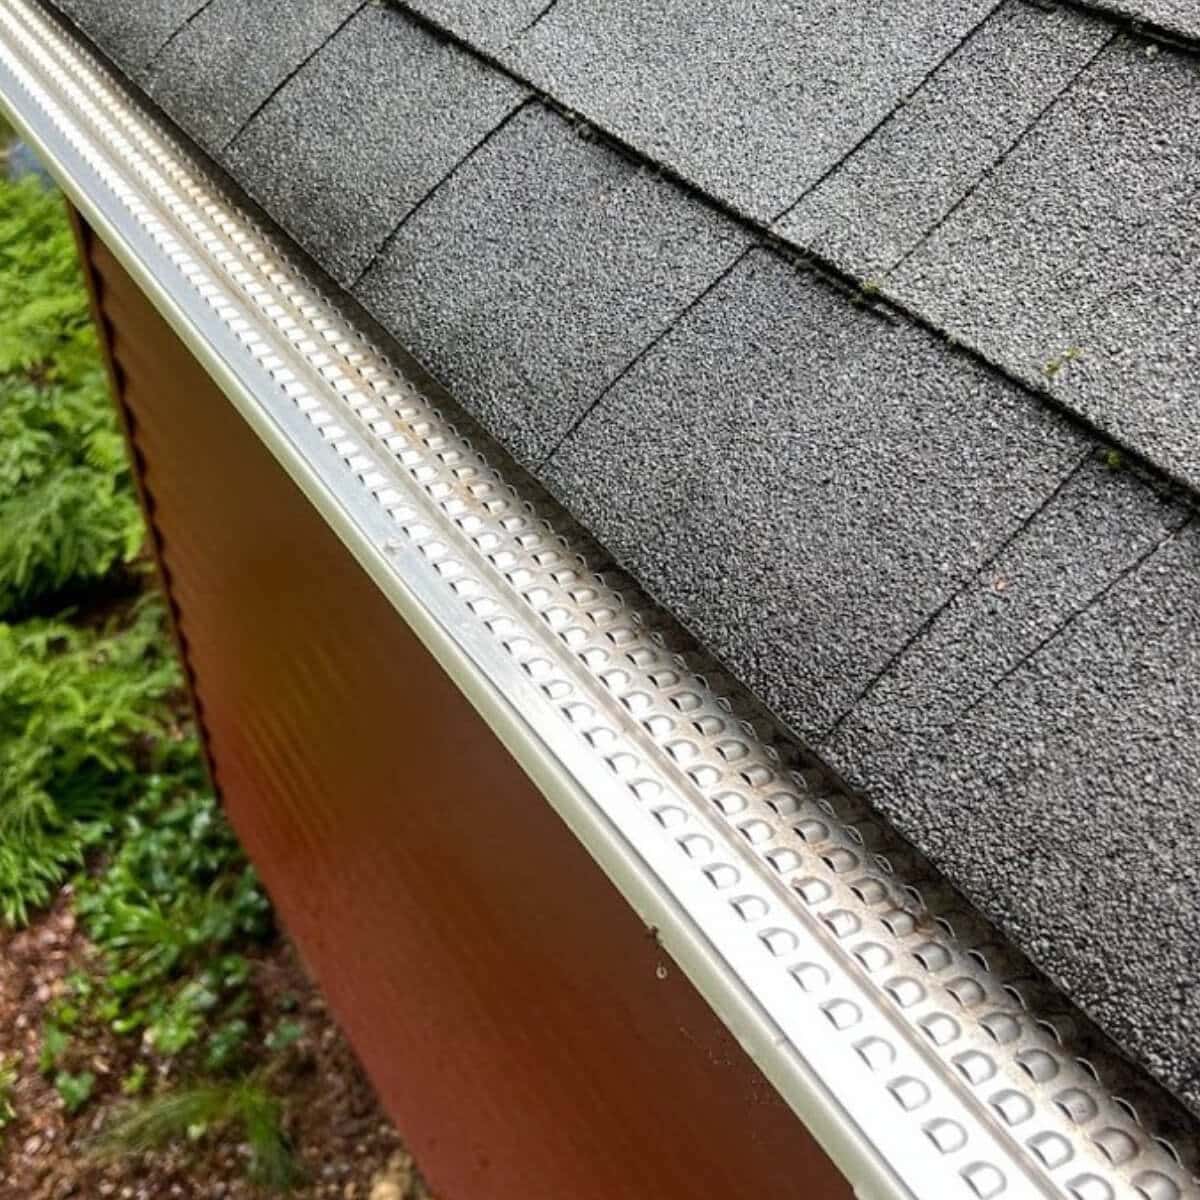 clean house gutter after pro gutter cleaning service in bethlehem pa